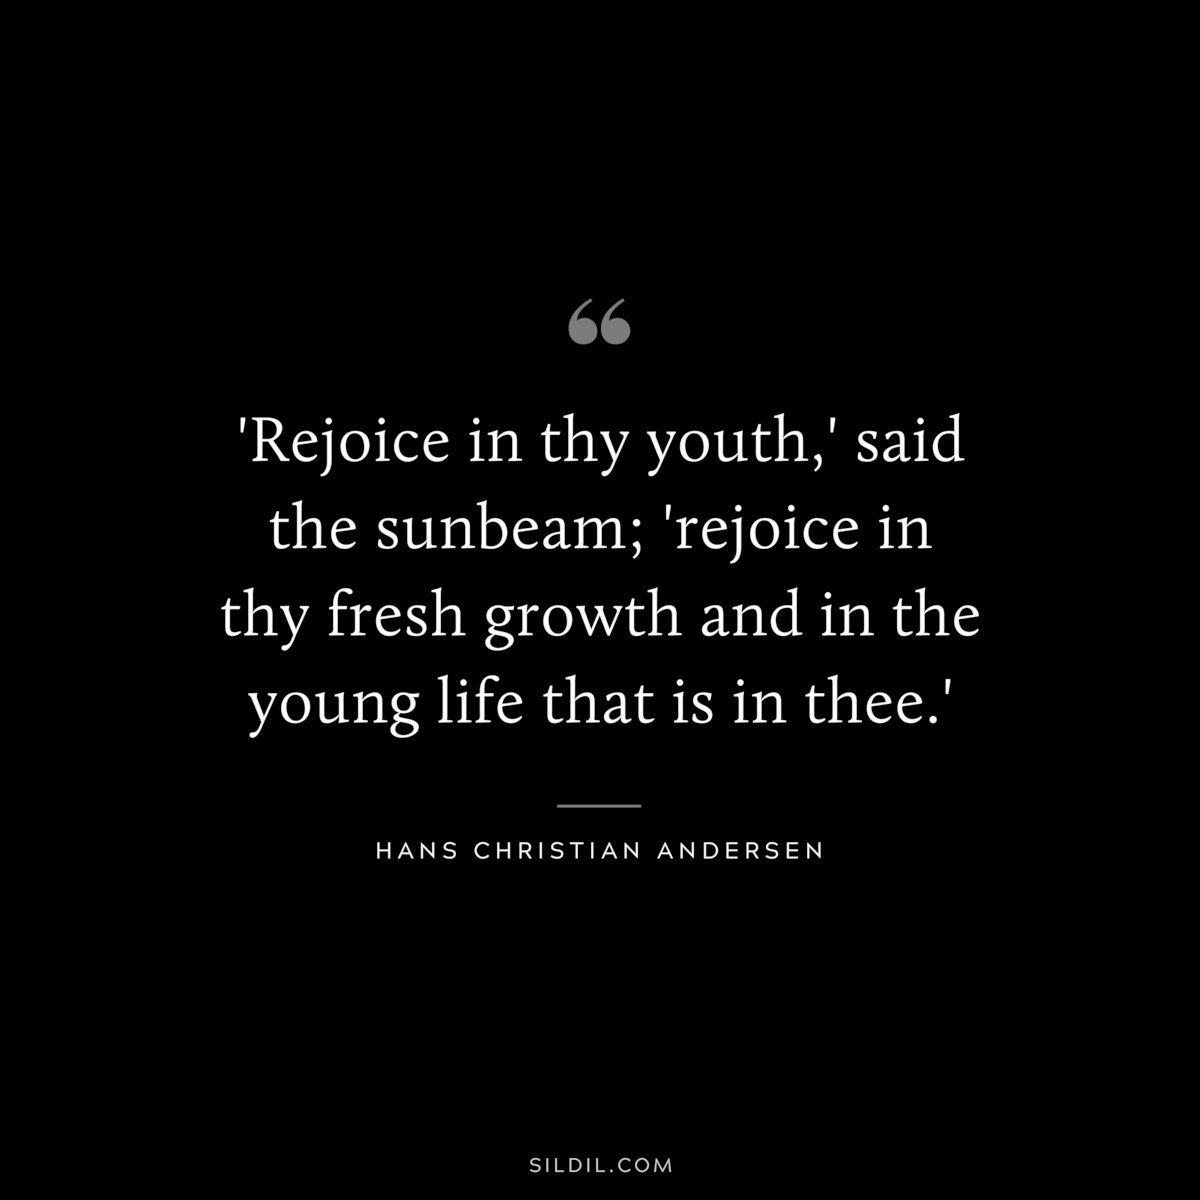 'Rejoice in thy youth,' said the sunbeam; 'rejoice in thy fresh growth and in the young life that is in thee.' ― Hans Christian Andersen